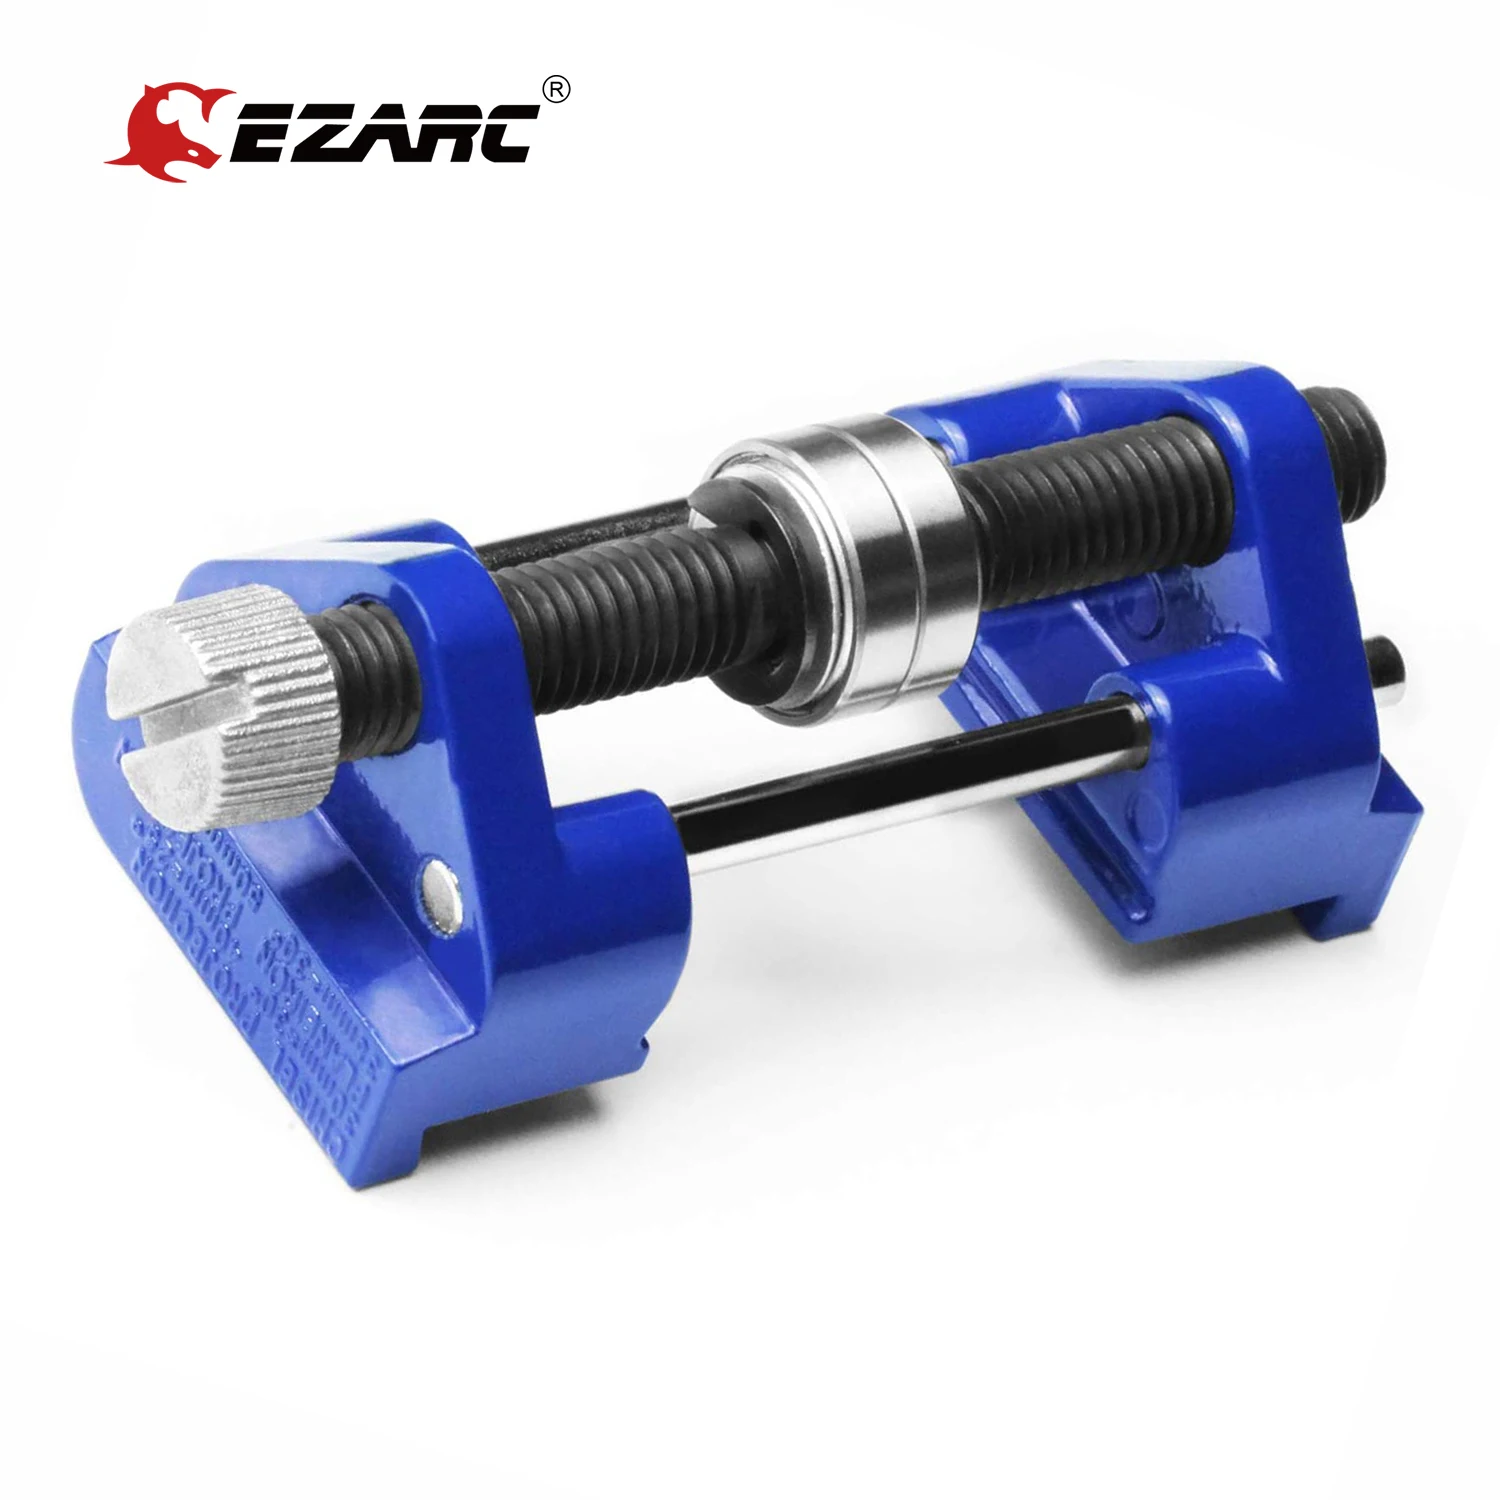 EZARC Chisel sharpener Side Clamping Fixed Angle Honing Guide,Planer Blade,for Wood Chisel Flat Chisel Edge Sharpening